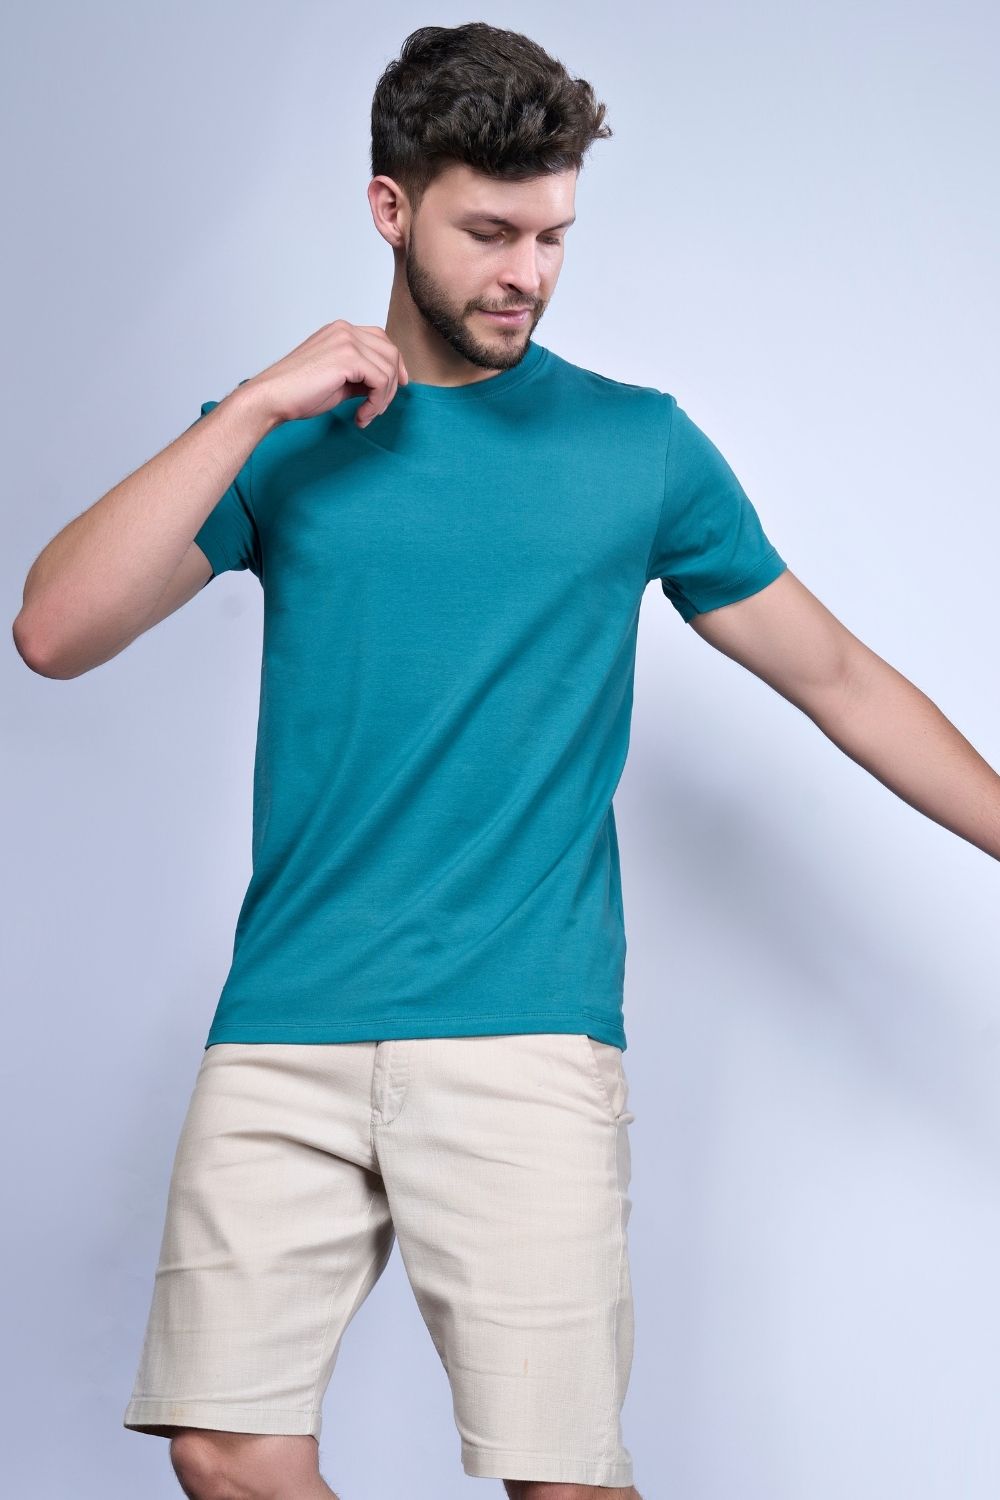 Cotton Stretch T shirt for men in the the solid color British Green with half sleeves and round neck.